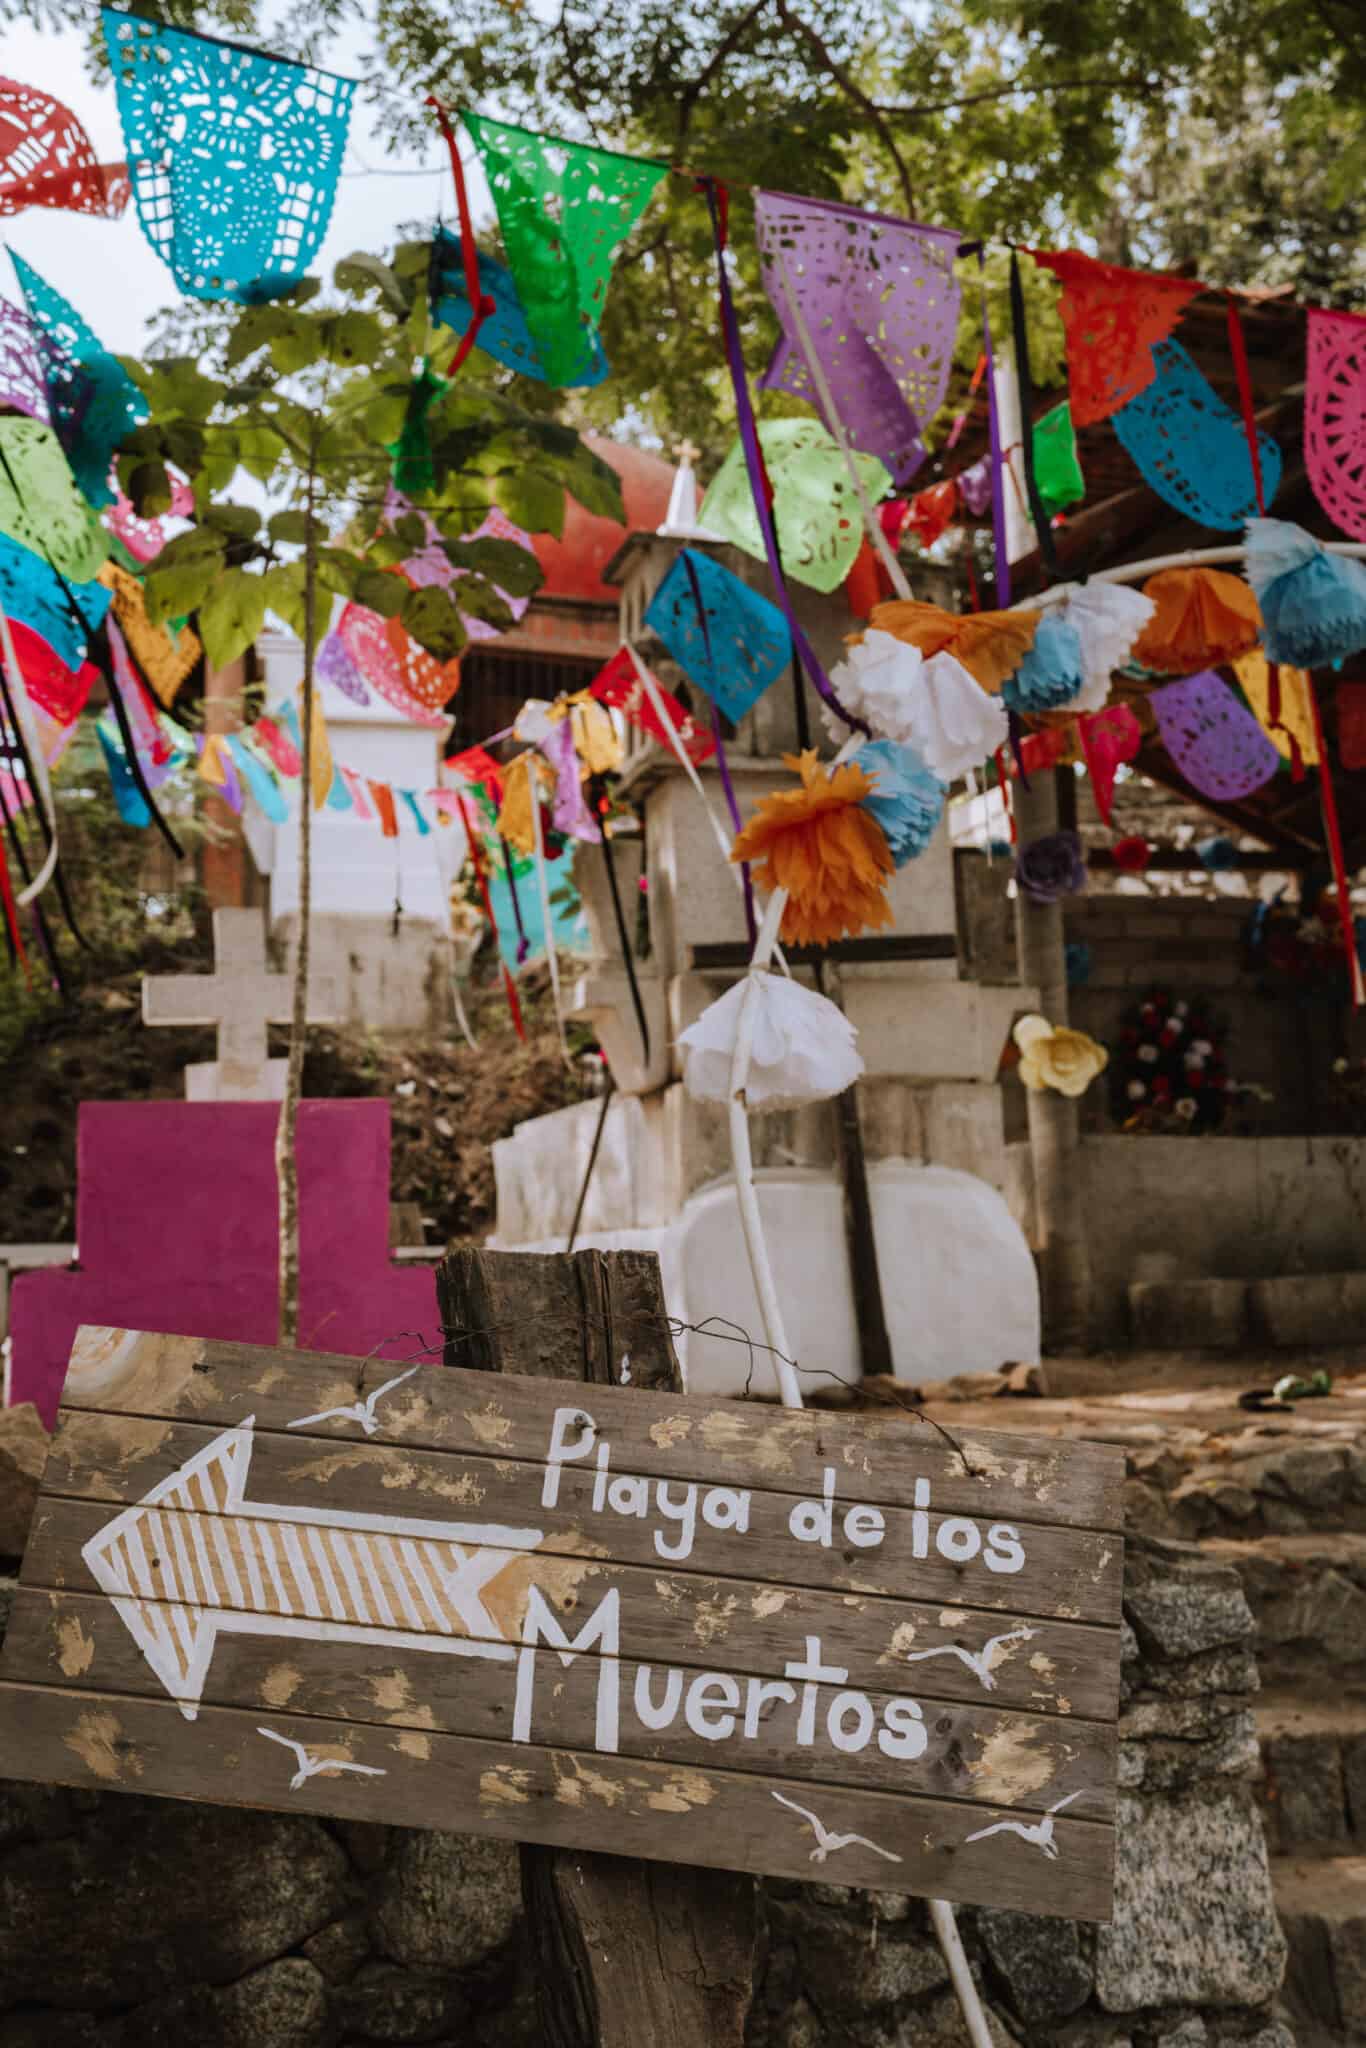 A Sayulita sign adorned with colorful flags.